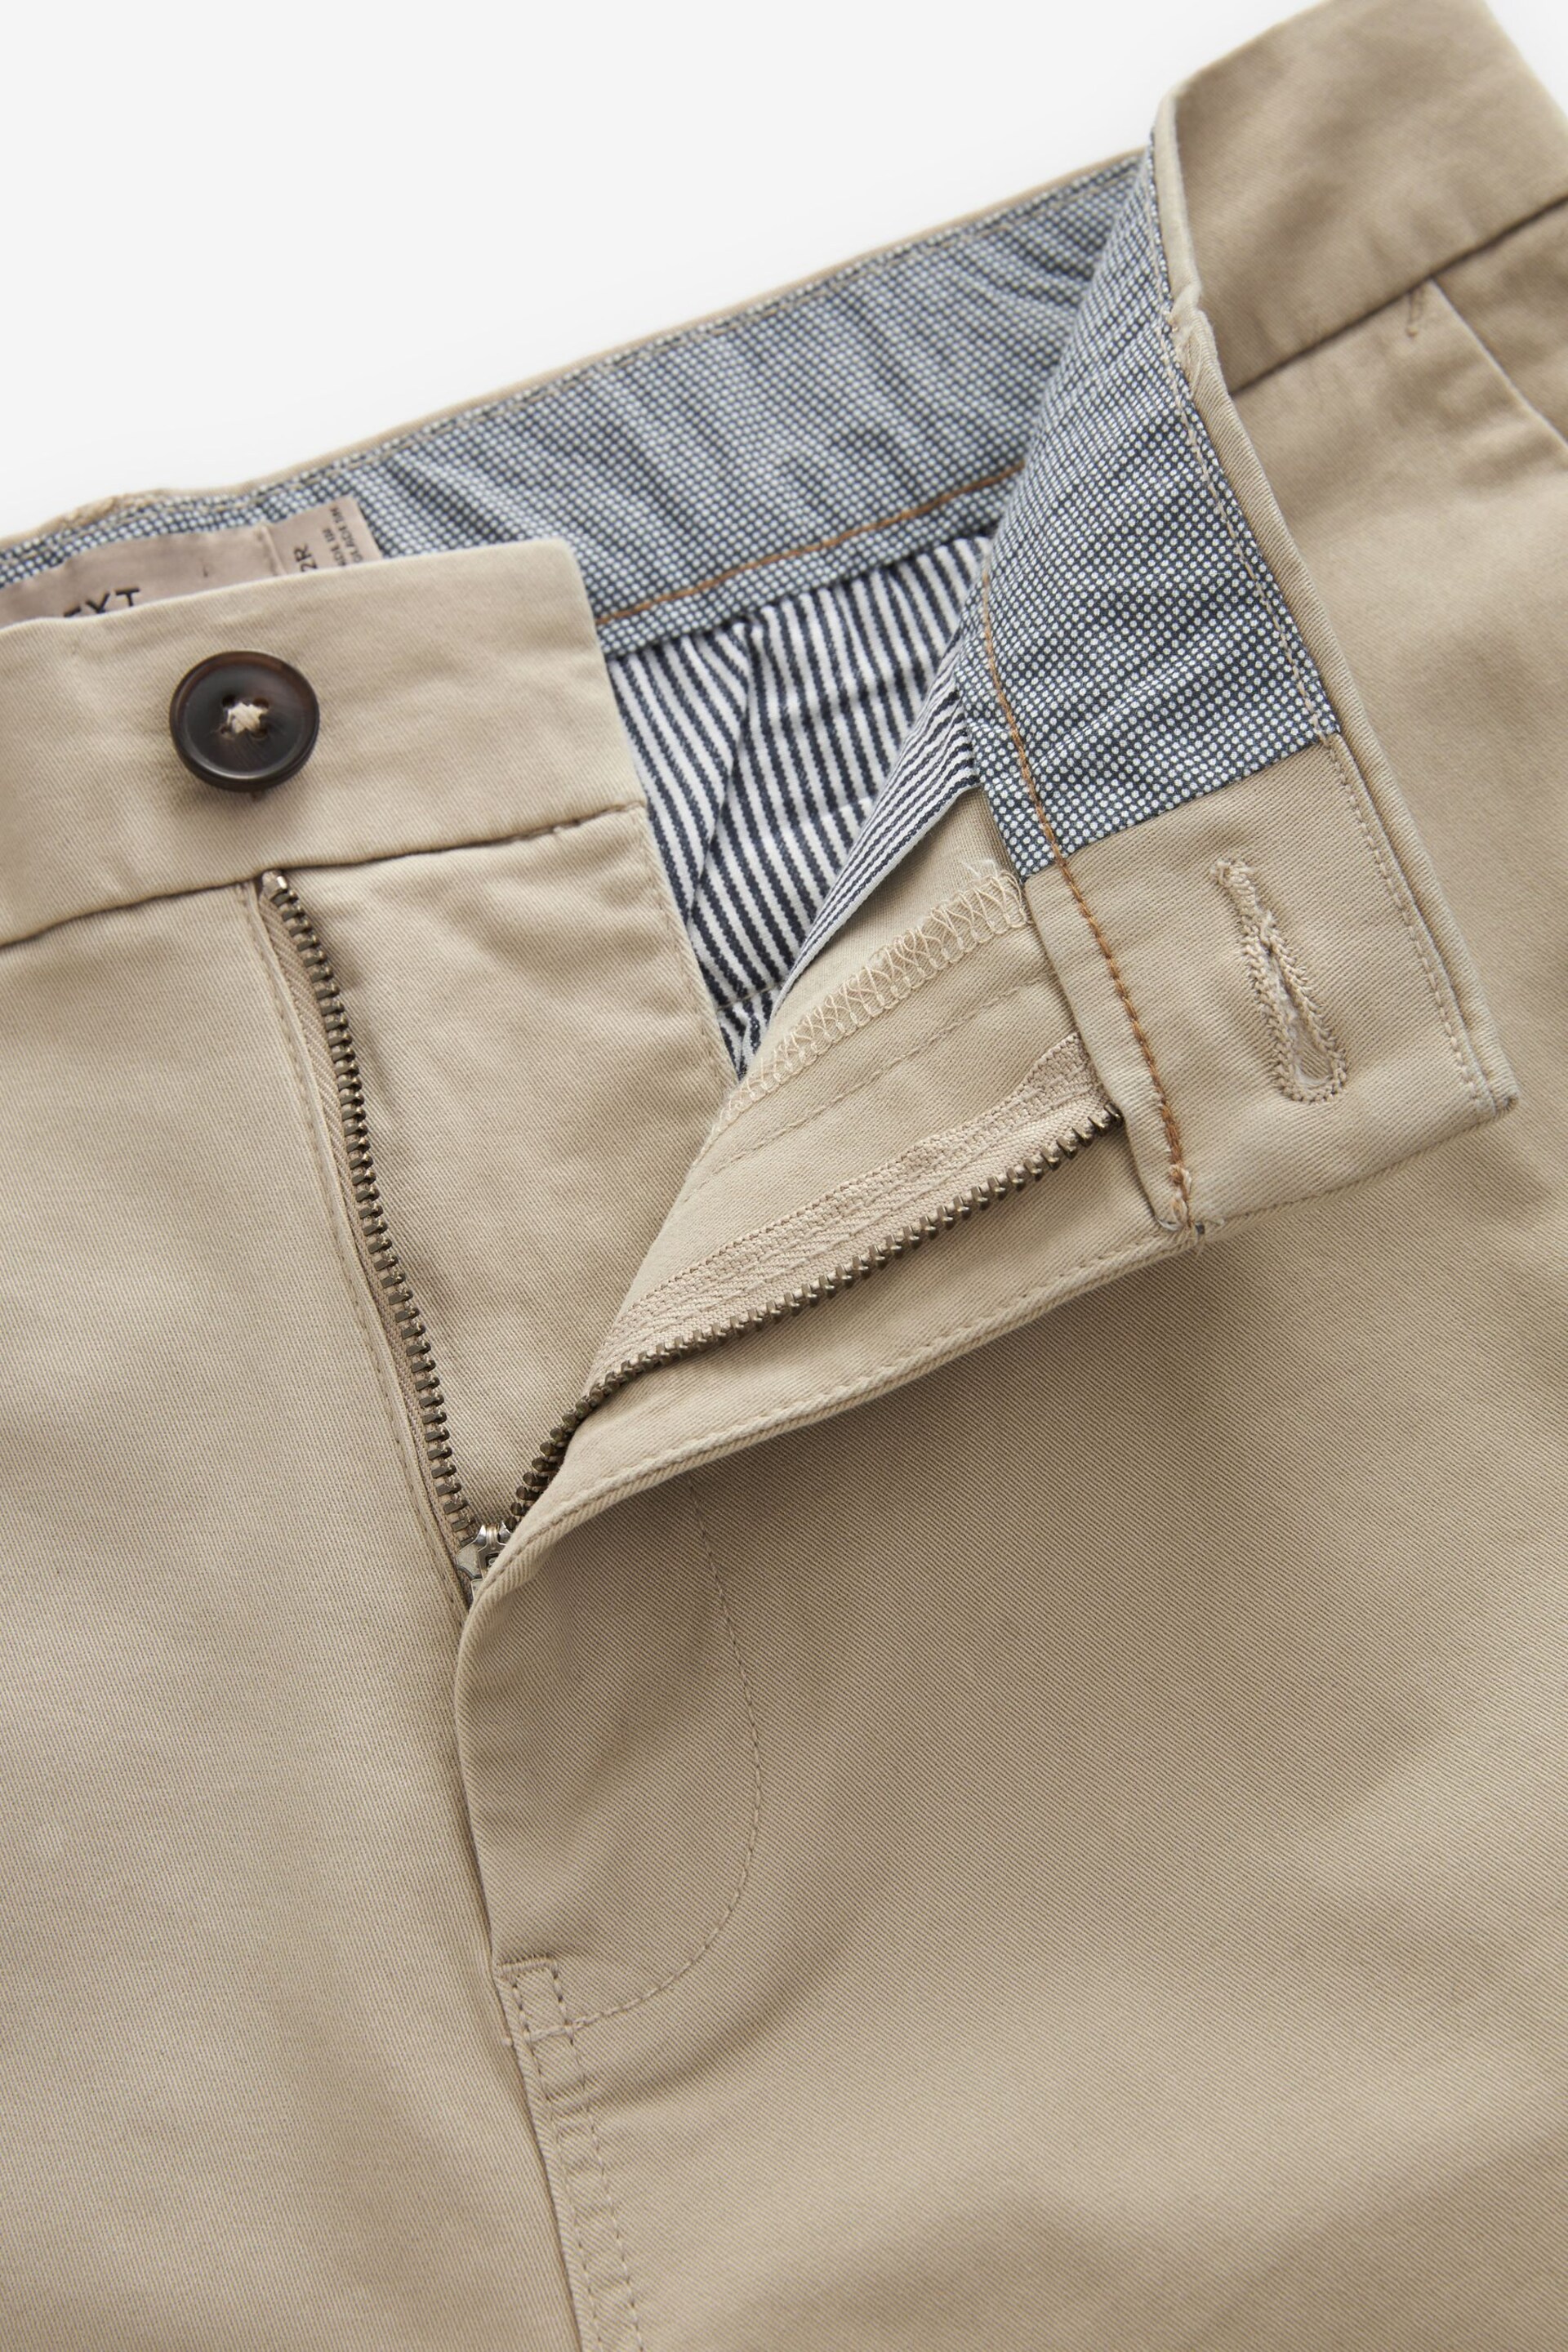 Stone Slim Fit Stretch Chinos Shorts - Image 6 of 9